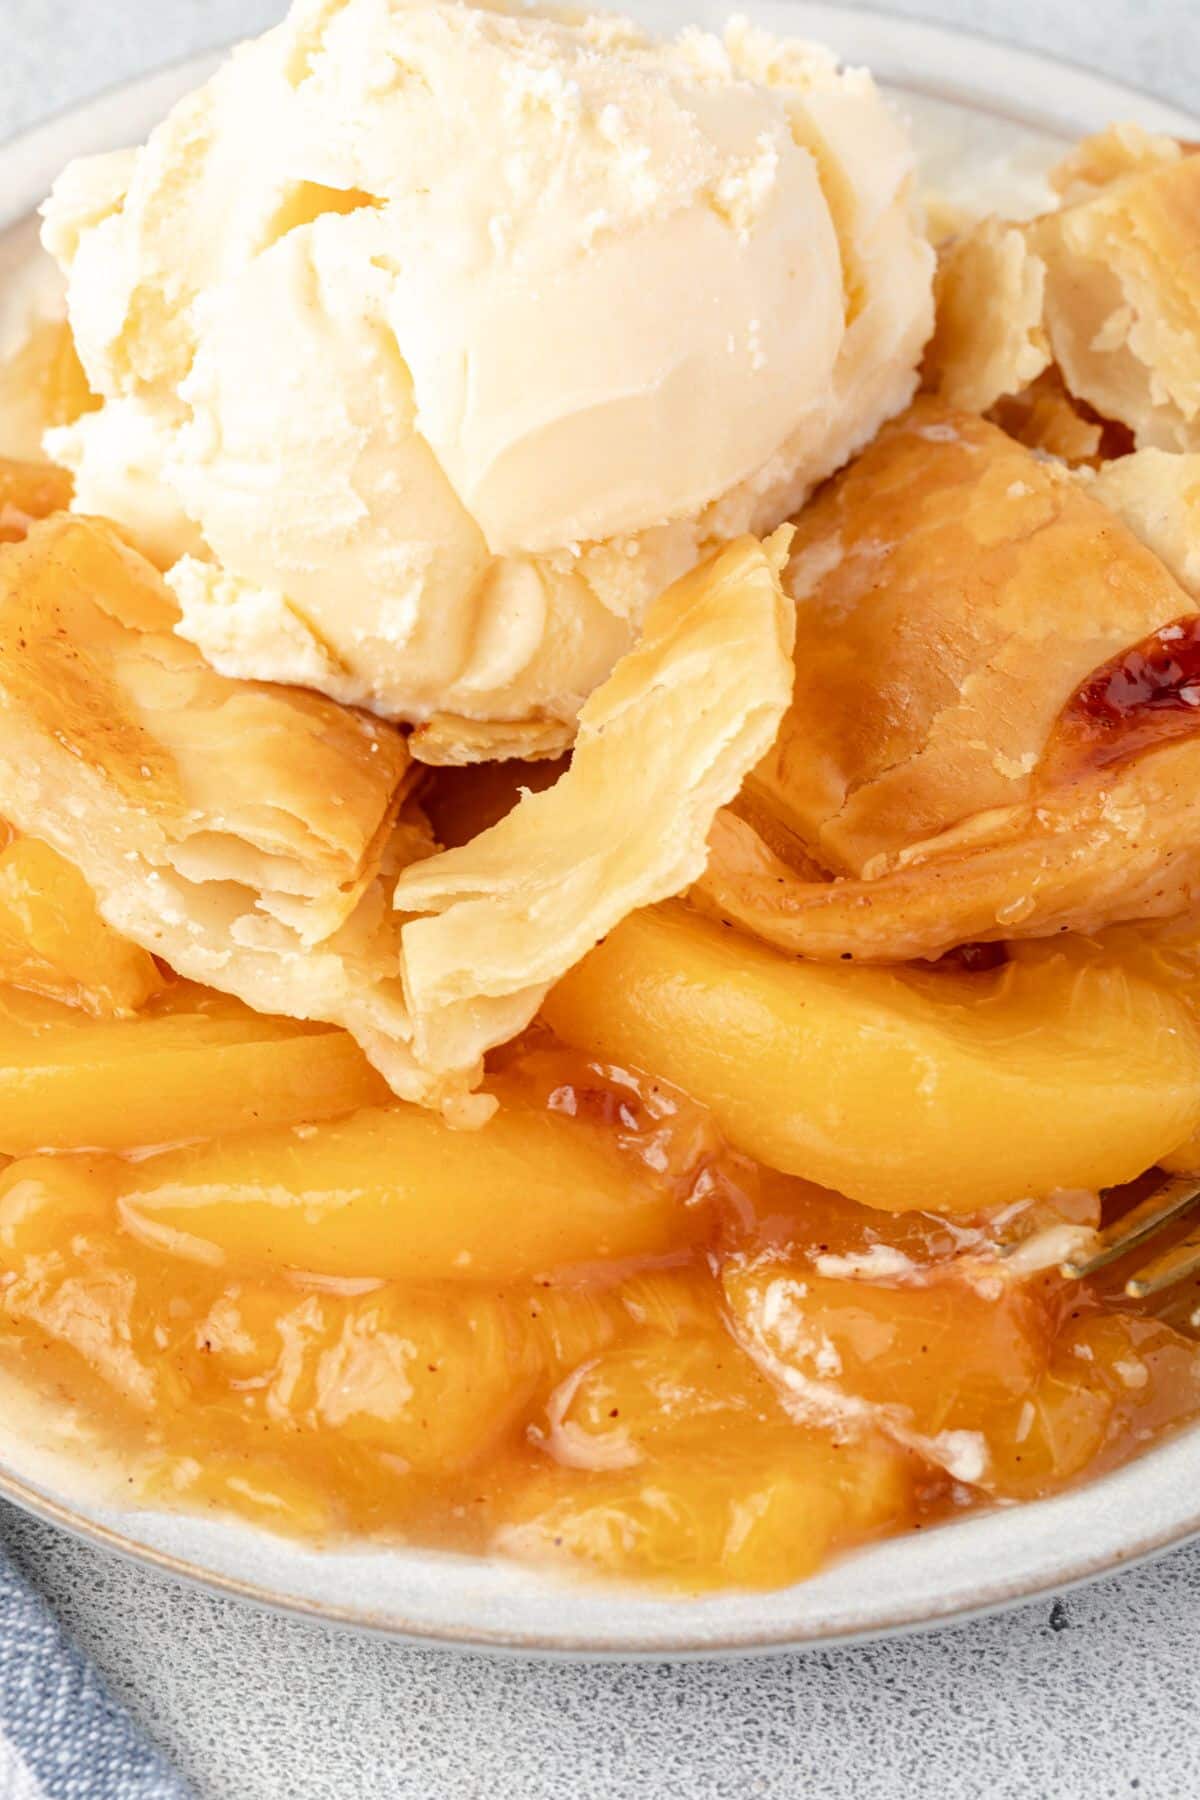 Close up of peach cobbler on a plate, showing slices of peaches, flaky crust topping, and melty ice cream.